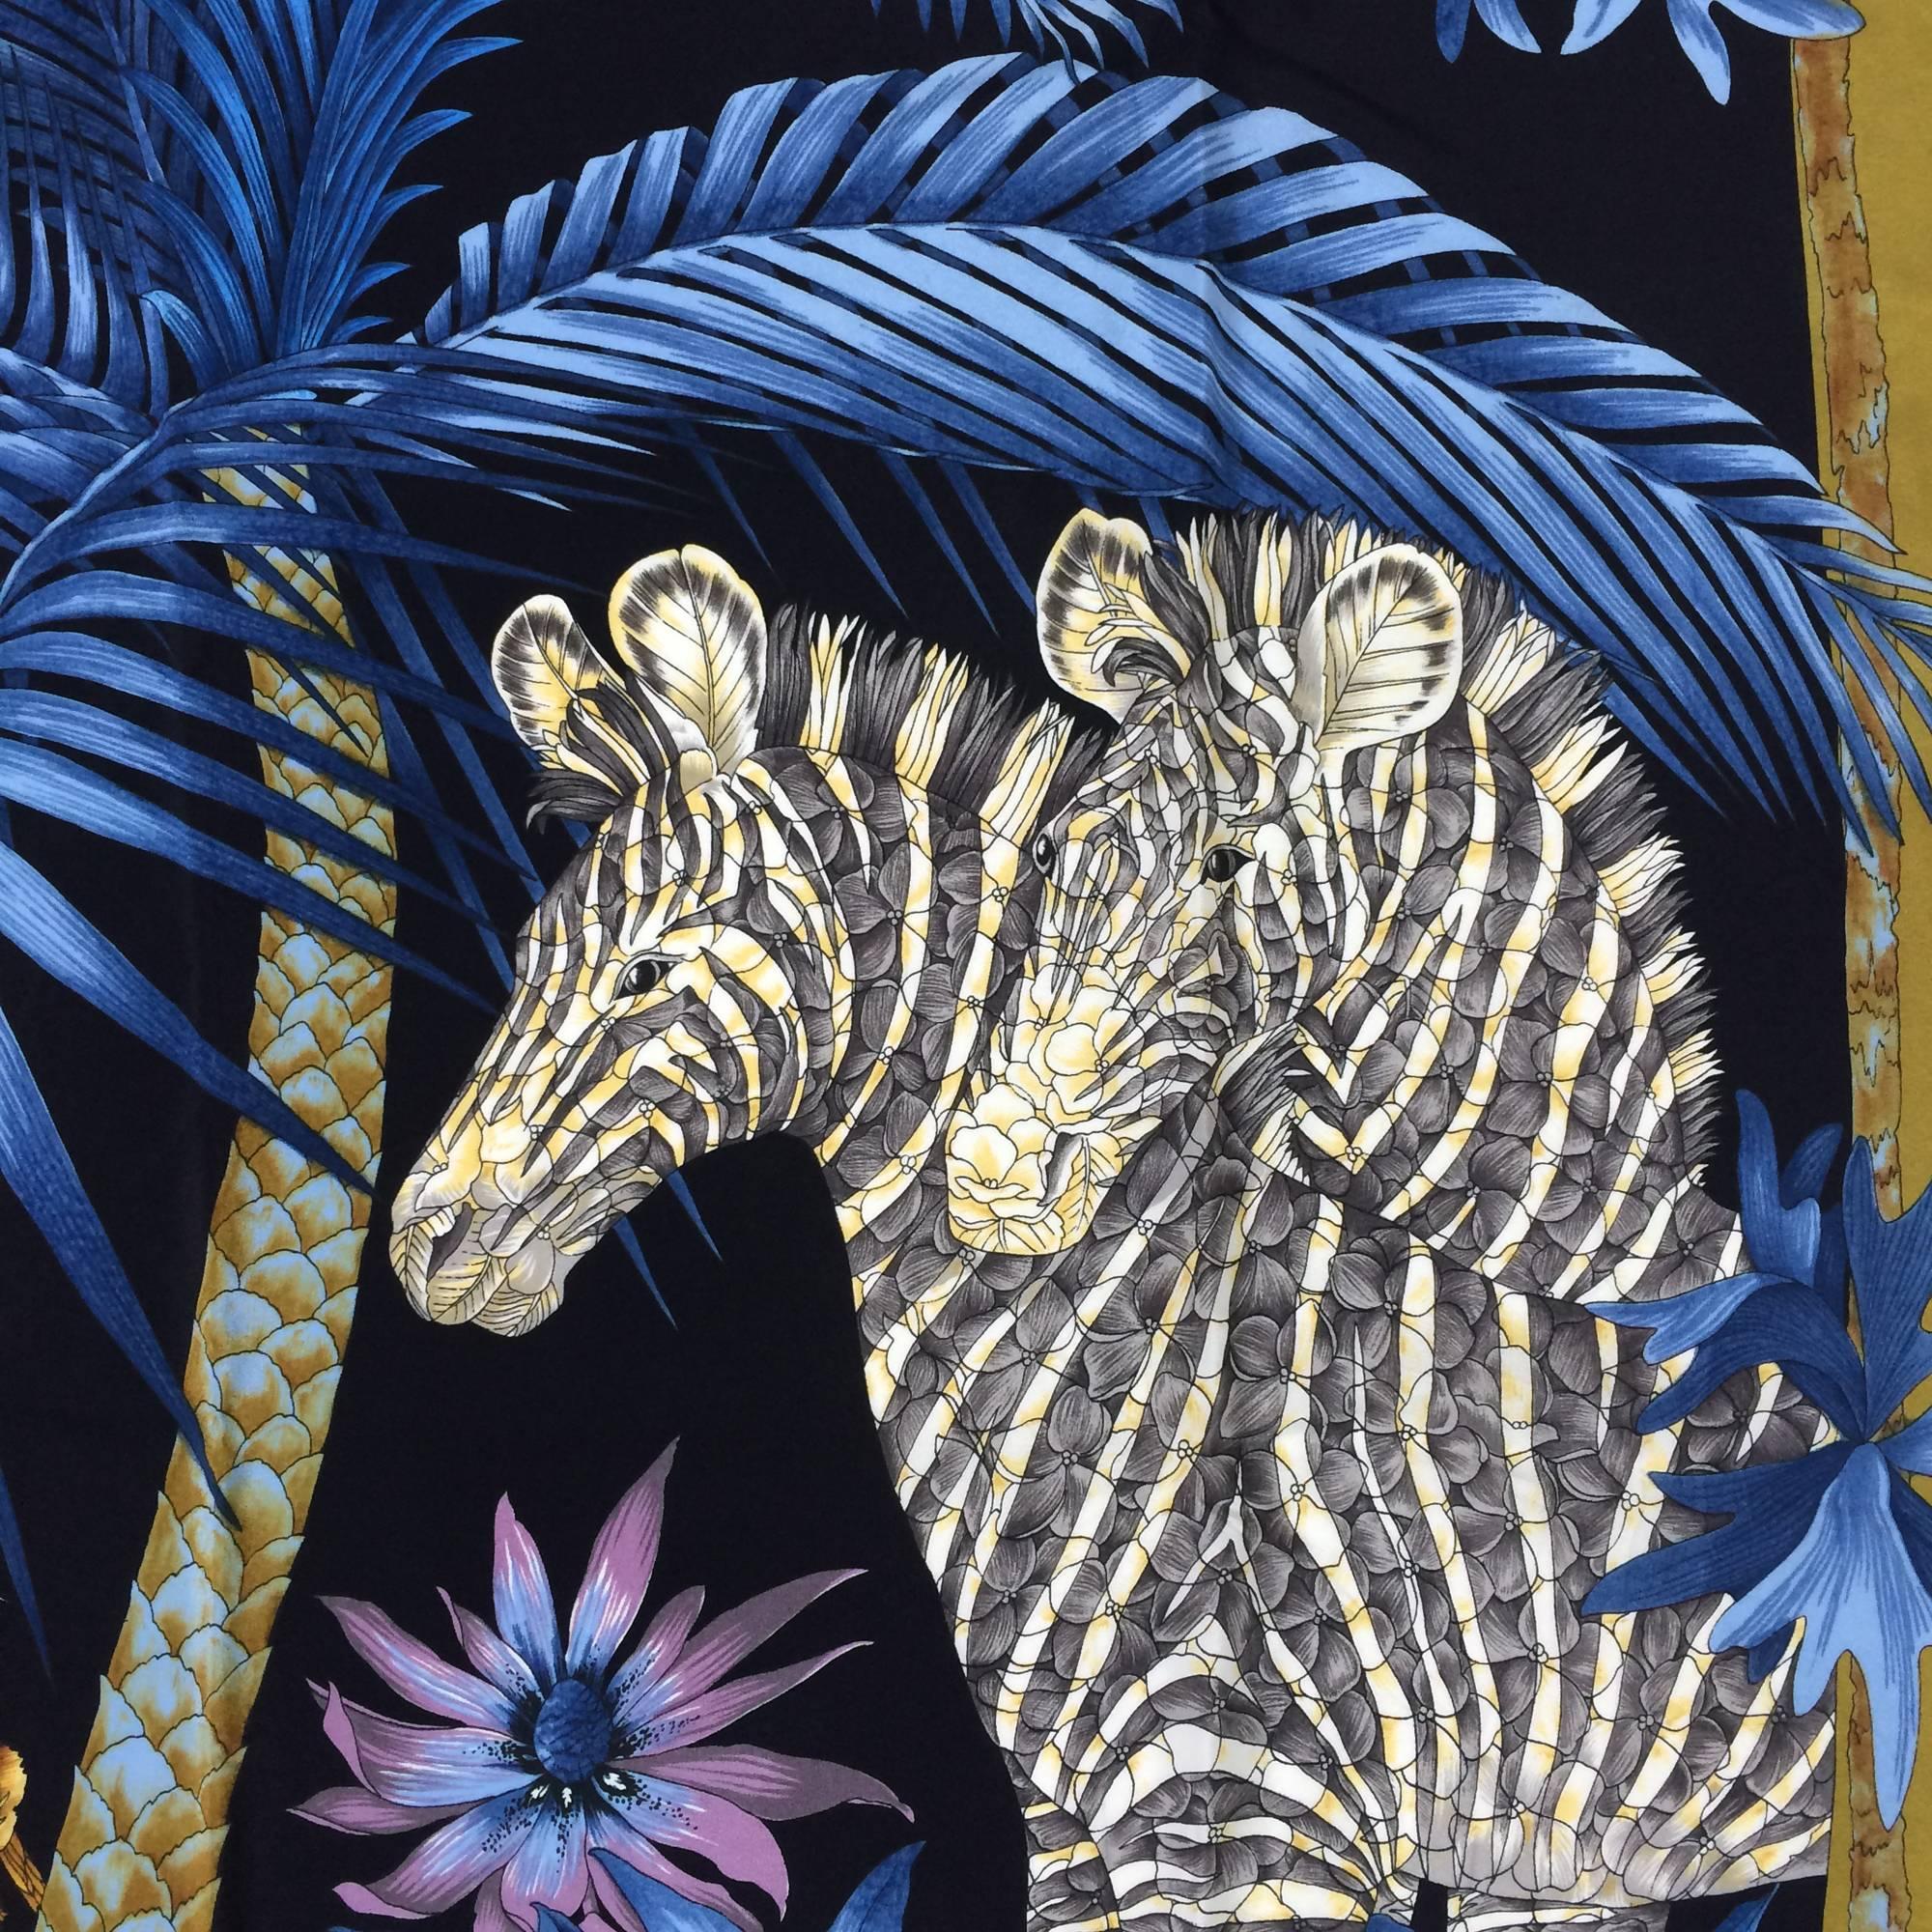 Vintage Ferragamo blue jungle silk scarf with a pair of golden lions and zebras under a blue palm tree, the scarf border is a beautiful shade of  split pea soup green...This silk scarf has the texture of a very fine crepe...Hand rolled edge...33